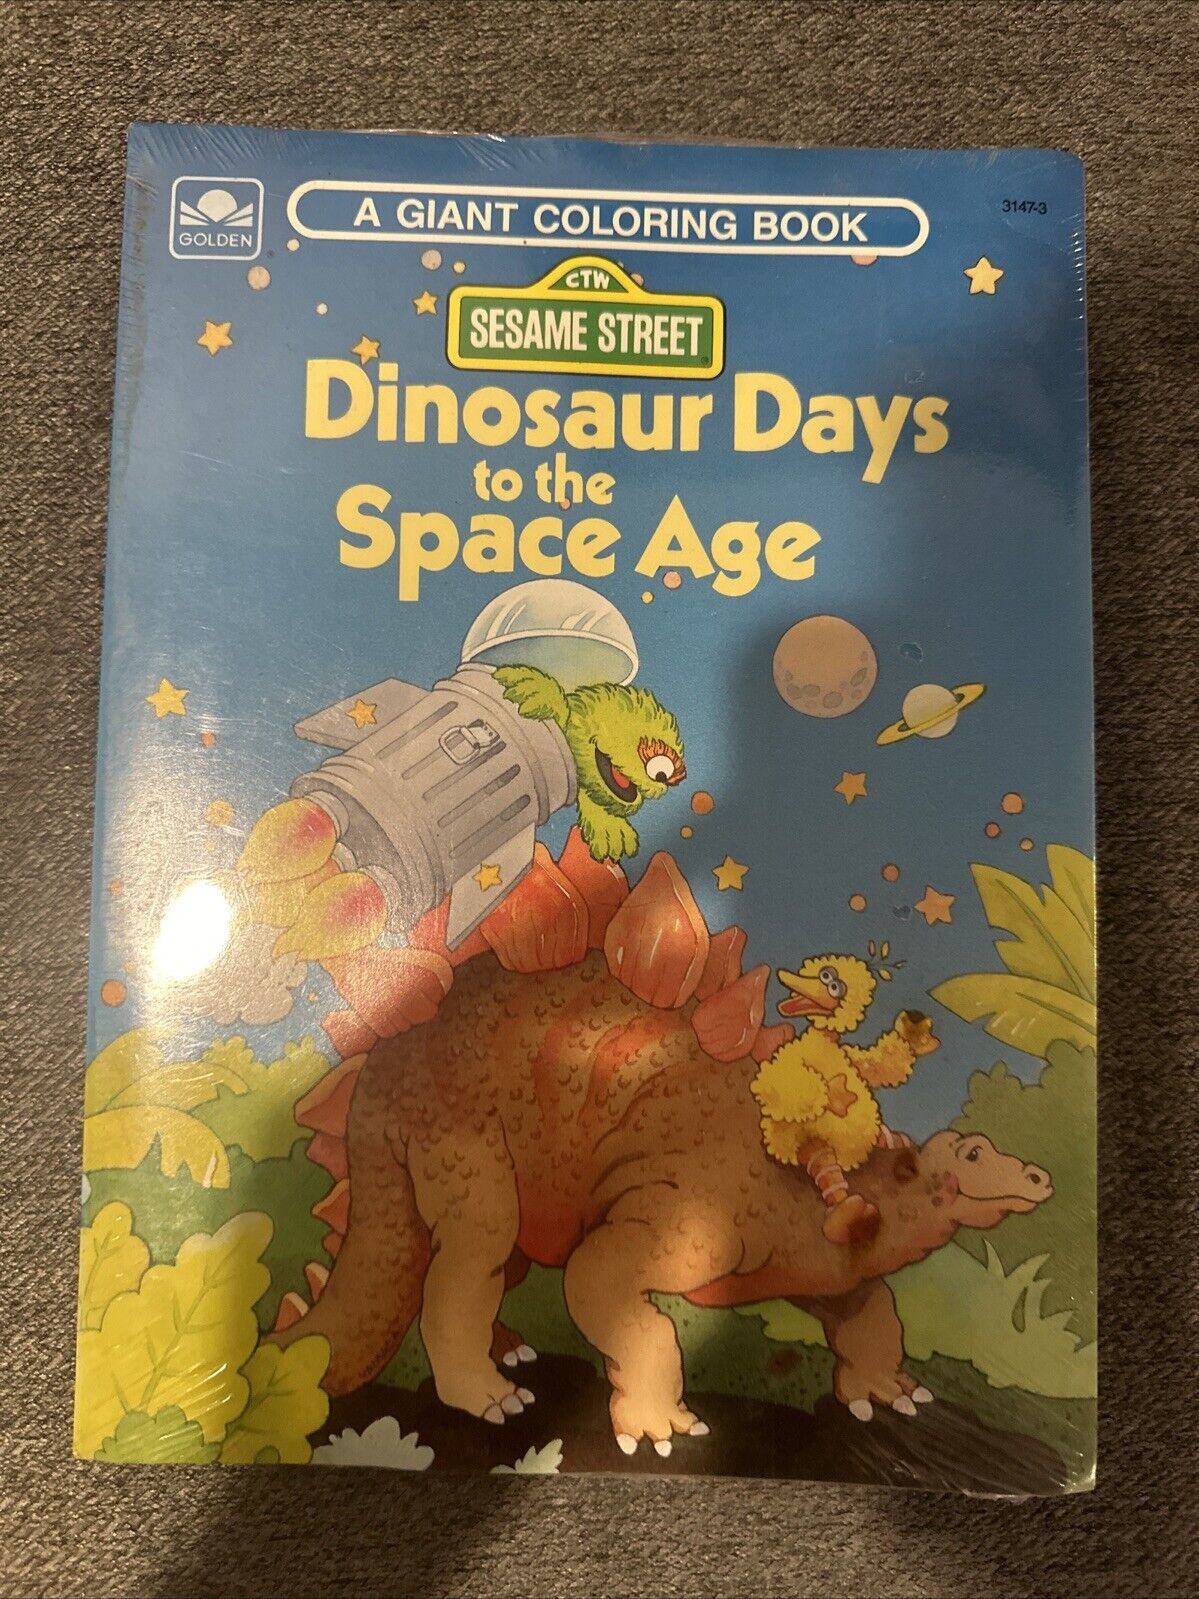 3 Vintage Sesame Street Golden Coloring Book Dinosaur Days to Space Age 1980s ++